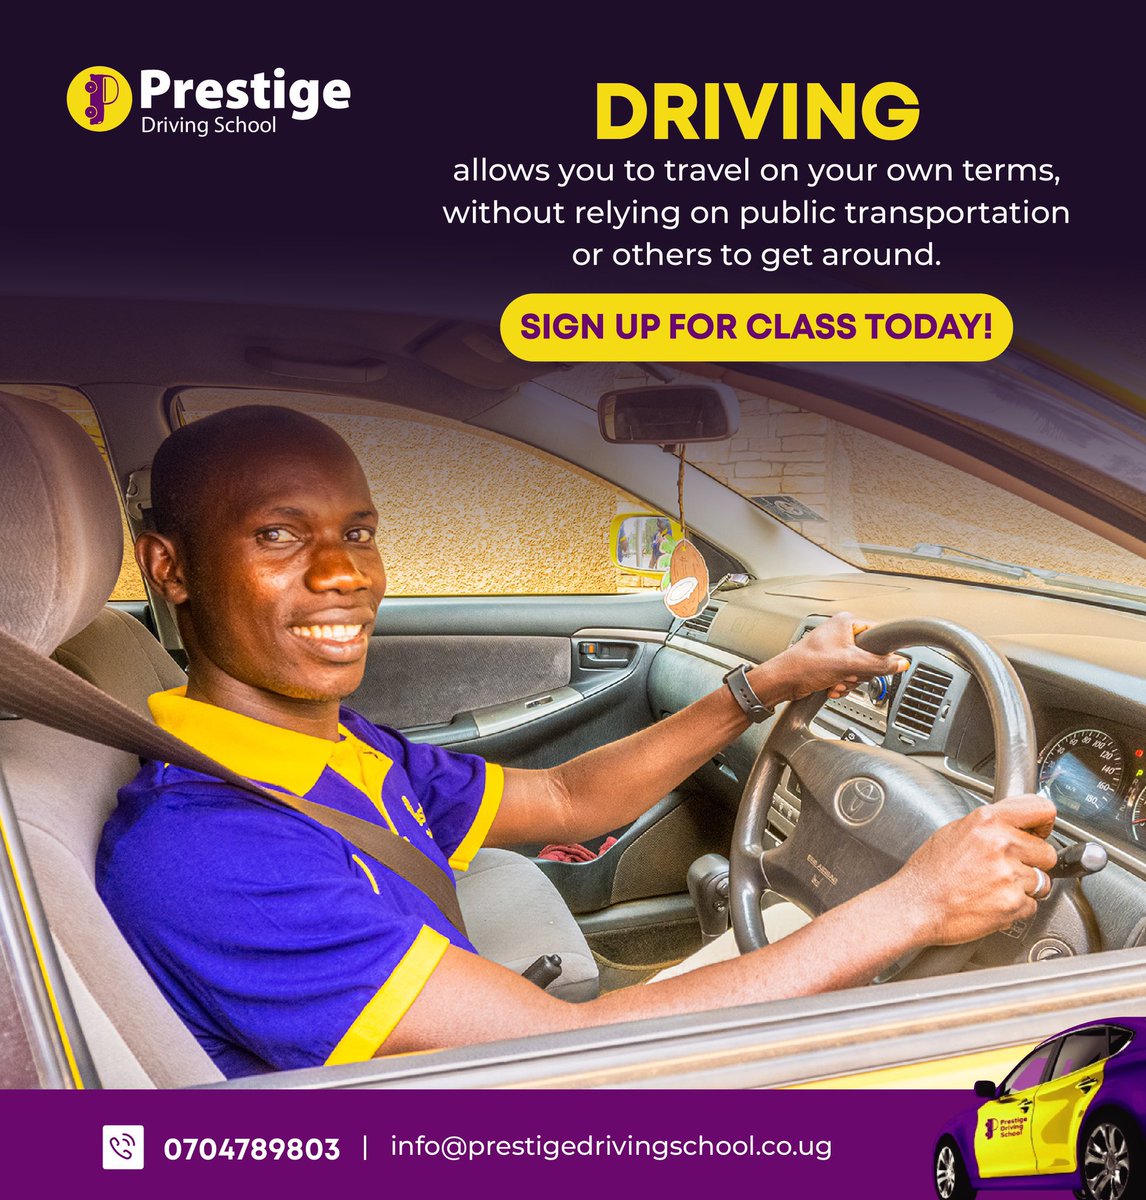 Embrace the new year with a fresh start! Our doors are open and we're ready to guide you through driving lessons. Visit any of our branches to kickstart your journey.

Call 0704789803 / 0392880190 to sign up and for any inquiries. #PrestigeDrivingSchool #NewYearNewSkills #Driving